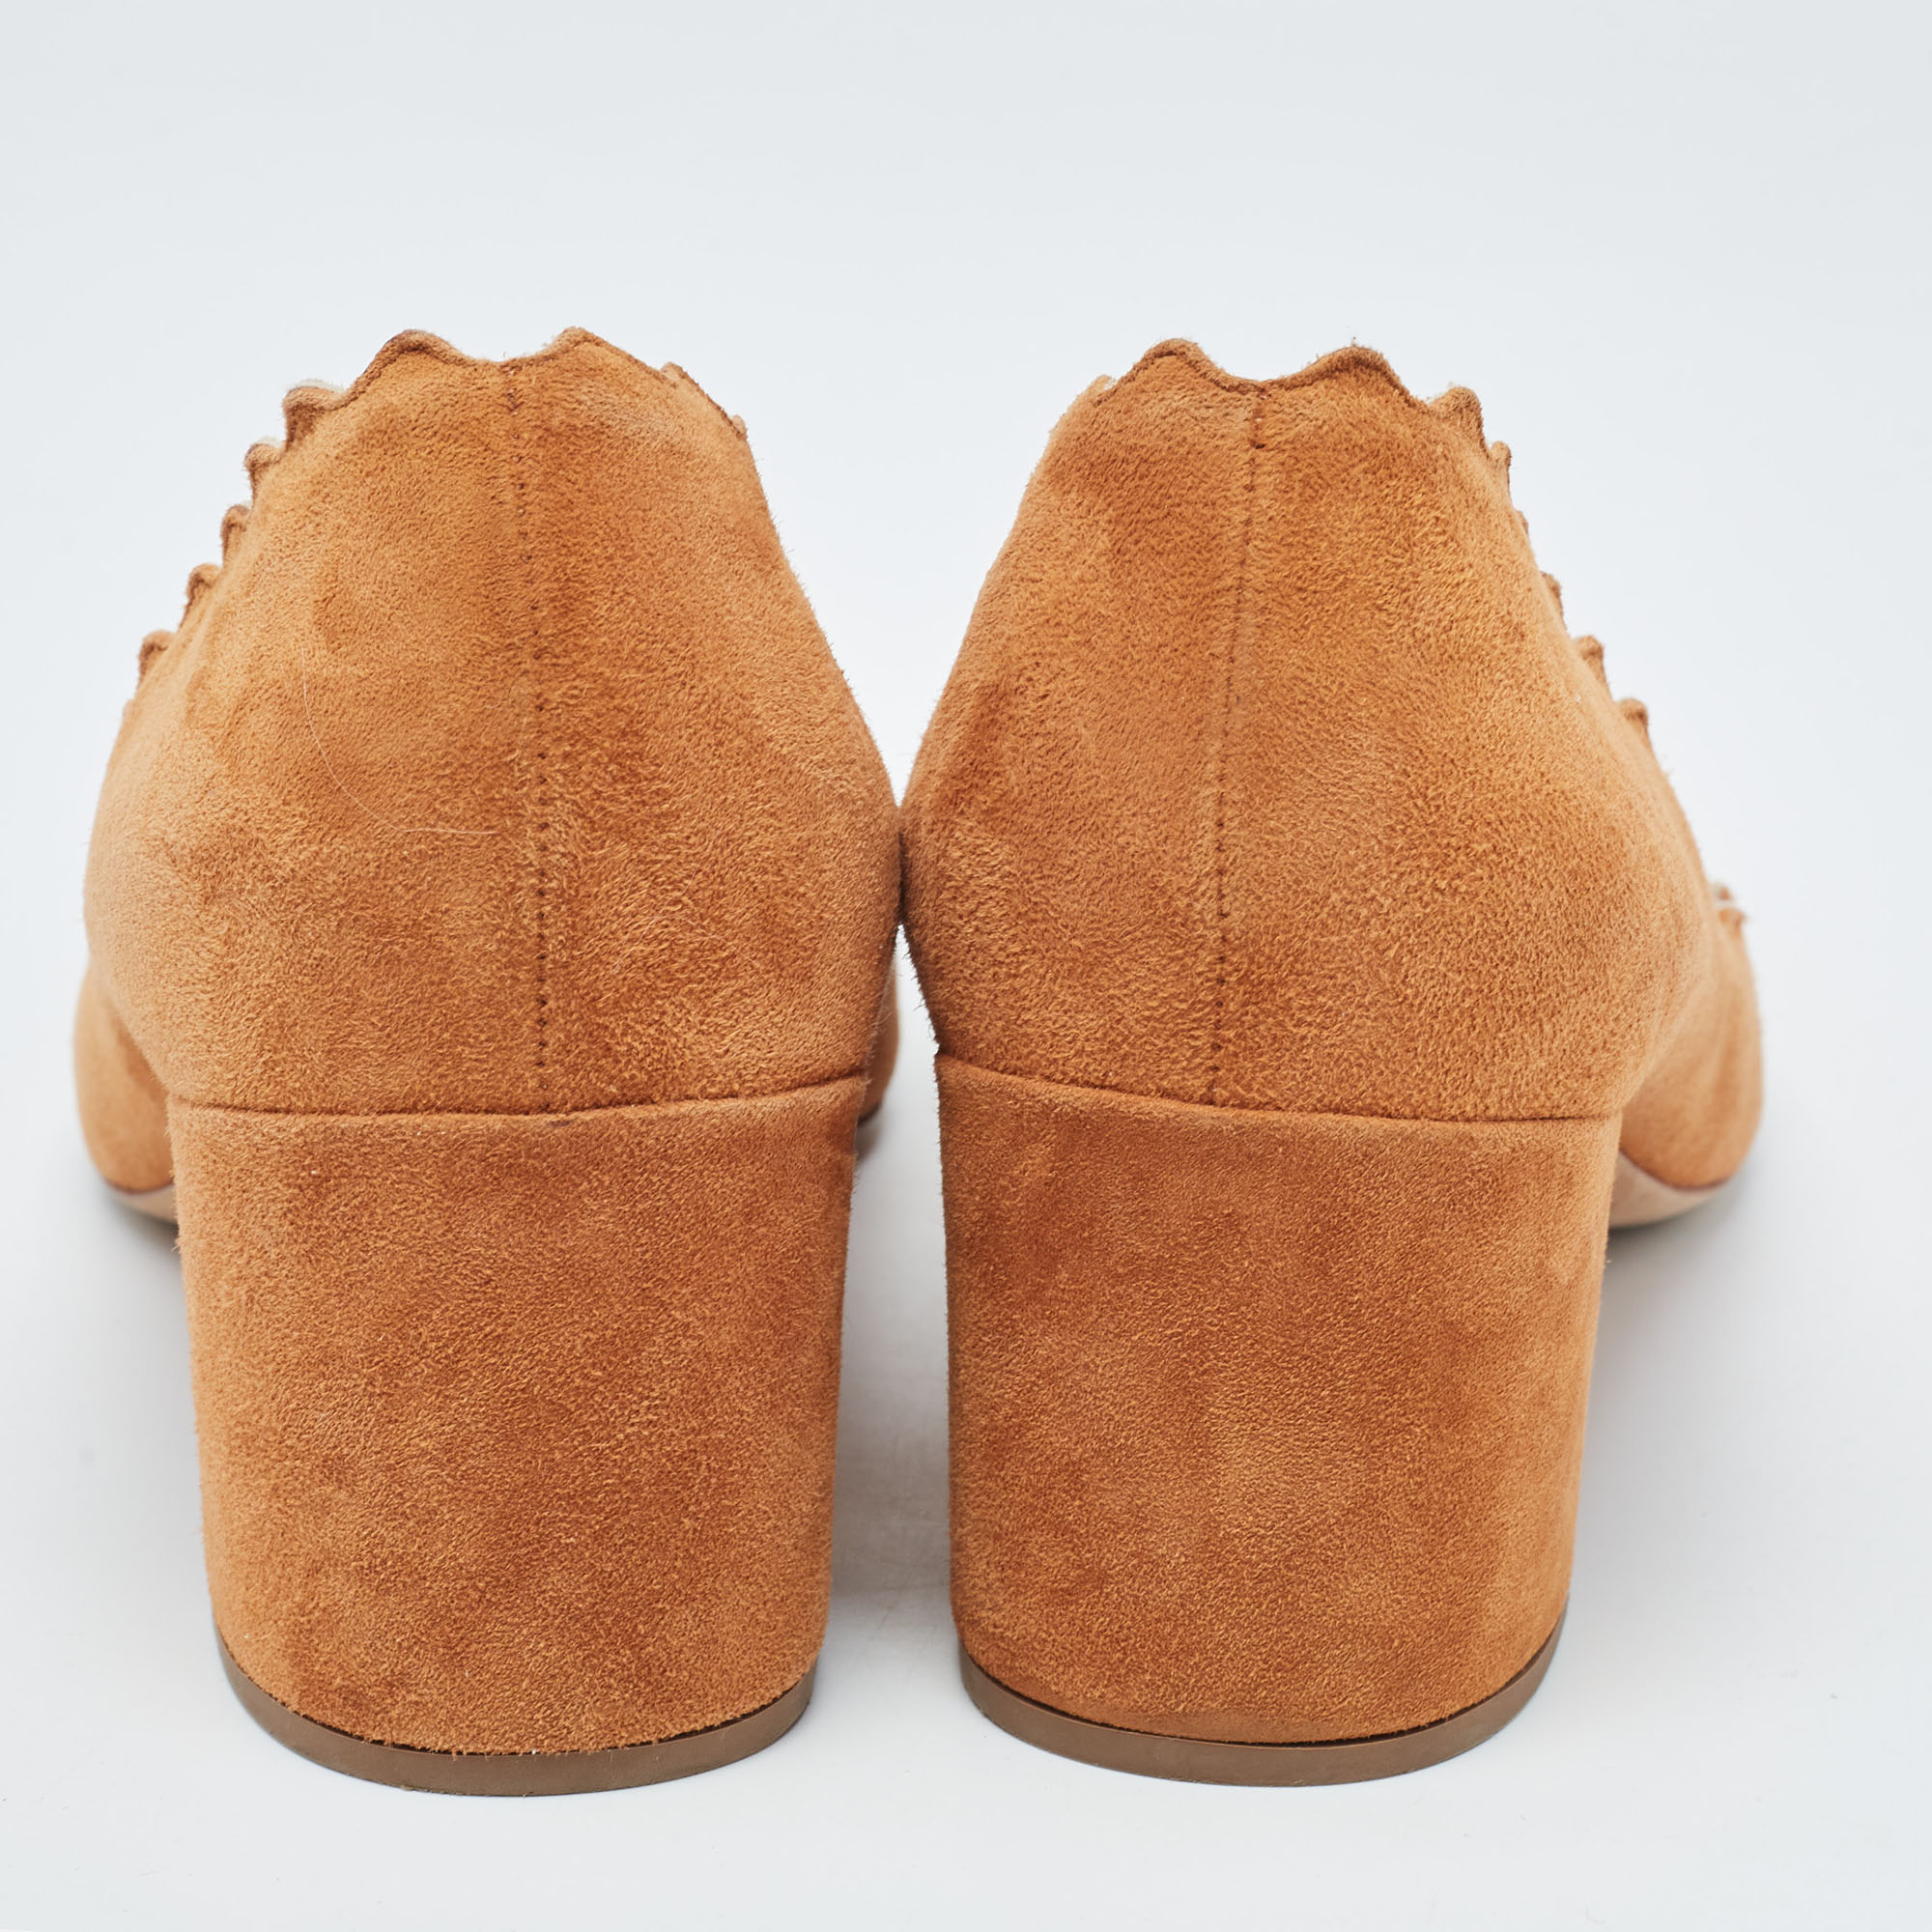 Chloe Brown Suede Laurena Scalloped Pumps Size 37